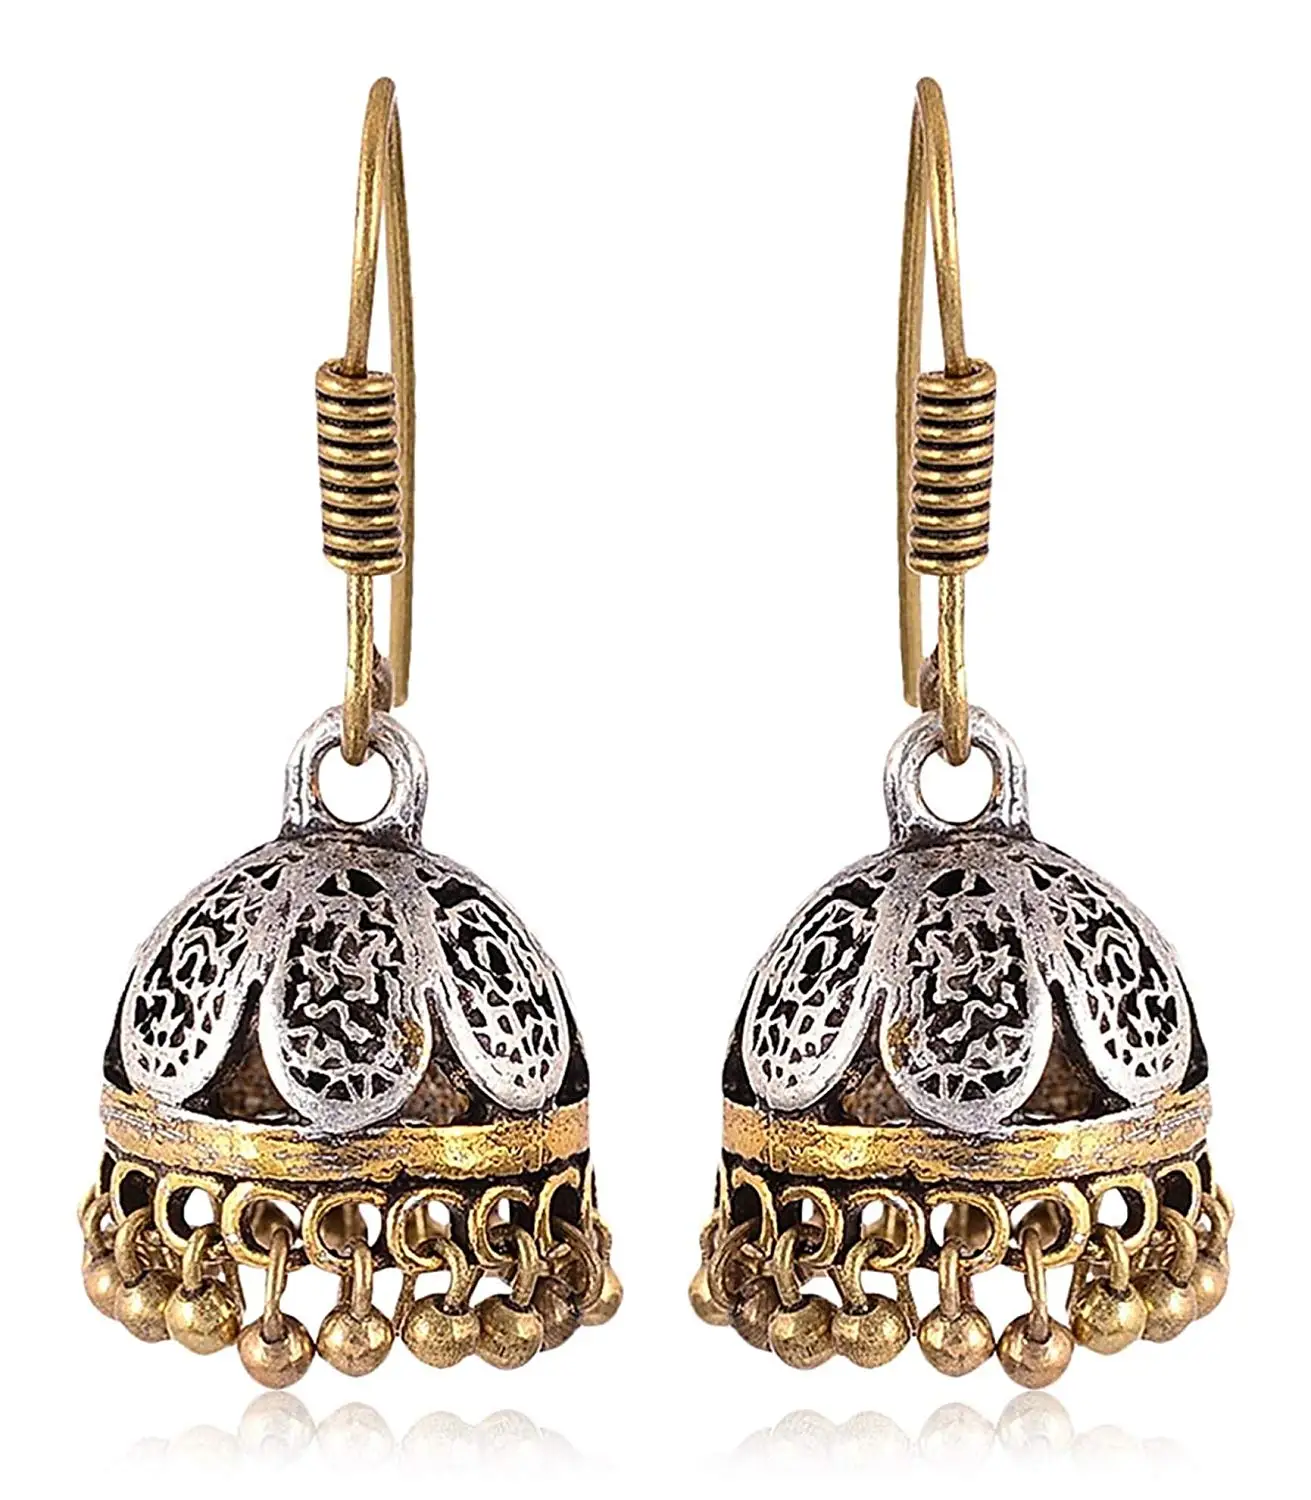 Subharpit Red Pearl Oxidized Silver Metal Non Precious Indian Ethnic Tratitional Tops Jhumki